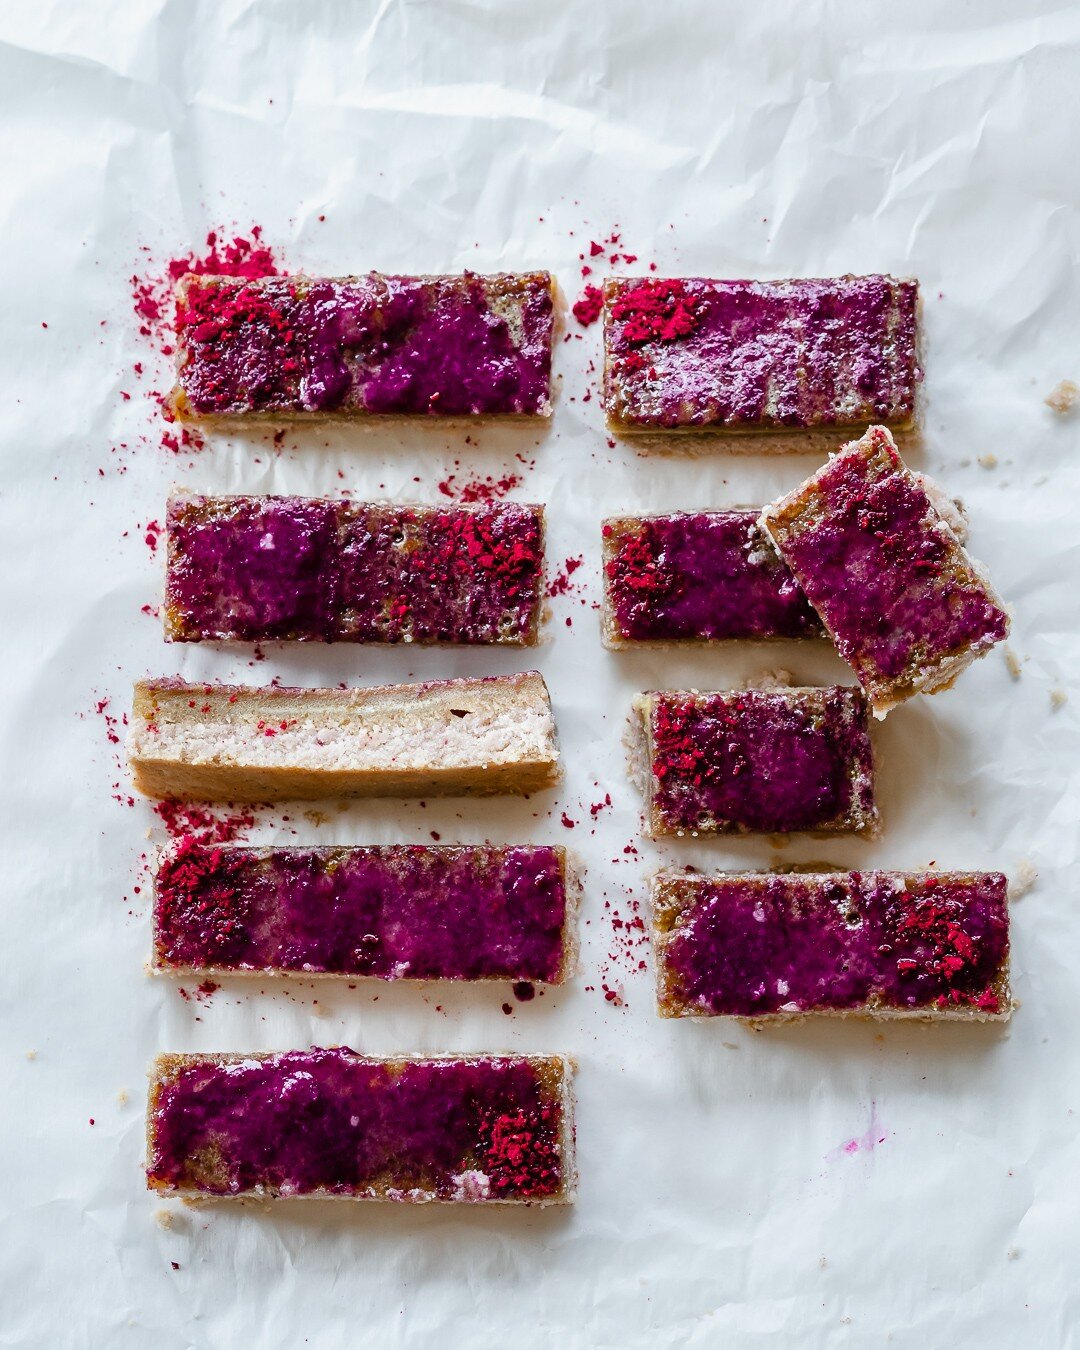 JAMUN &amp; RASPBERRY GLUTEN FREE BARS // or does that look like an unaligned bar chart? 🤔 Either way, a pretty shade from the purple/pink/red family is mandatory when baking today. 

Happy Valentine&rsquo;s to the most important person in your life